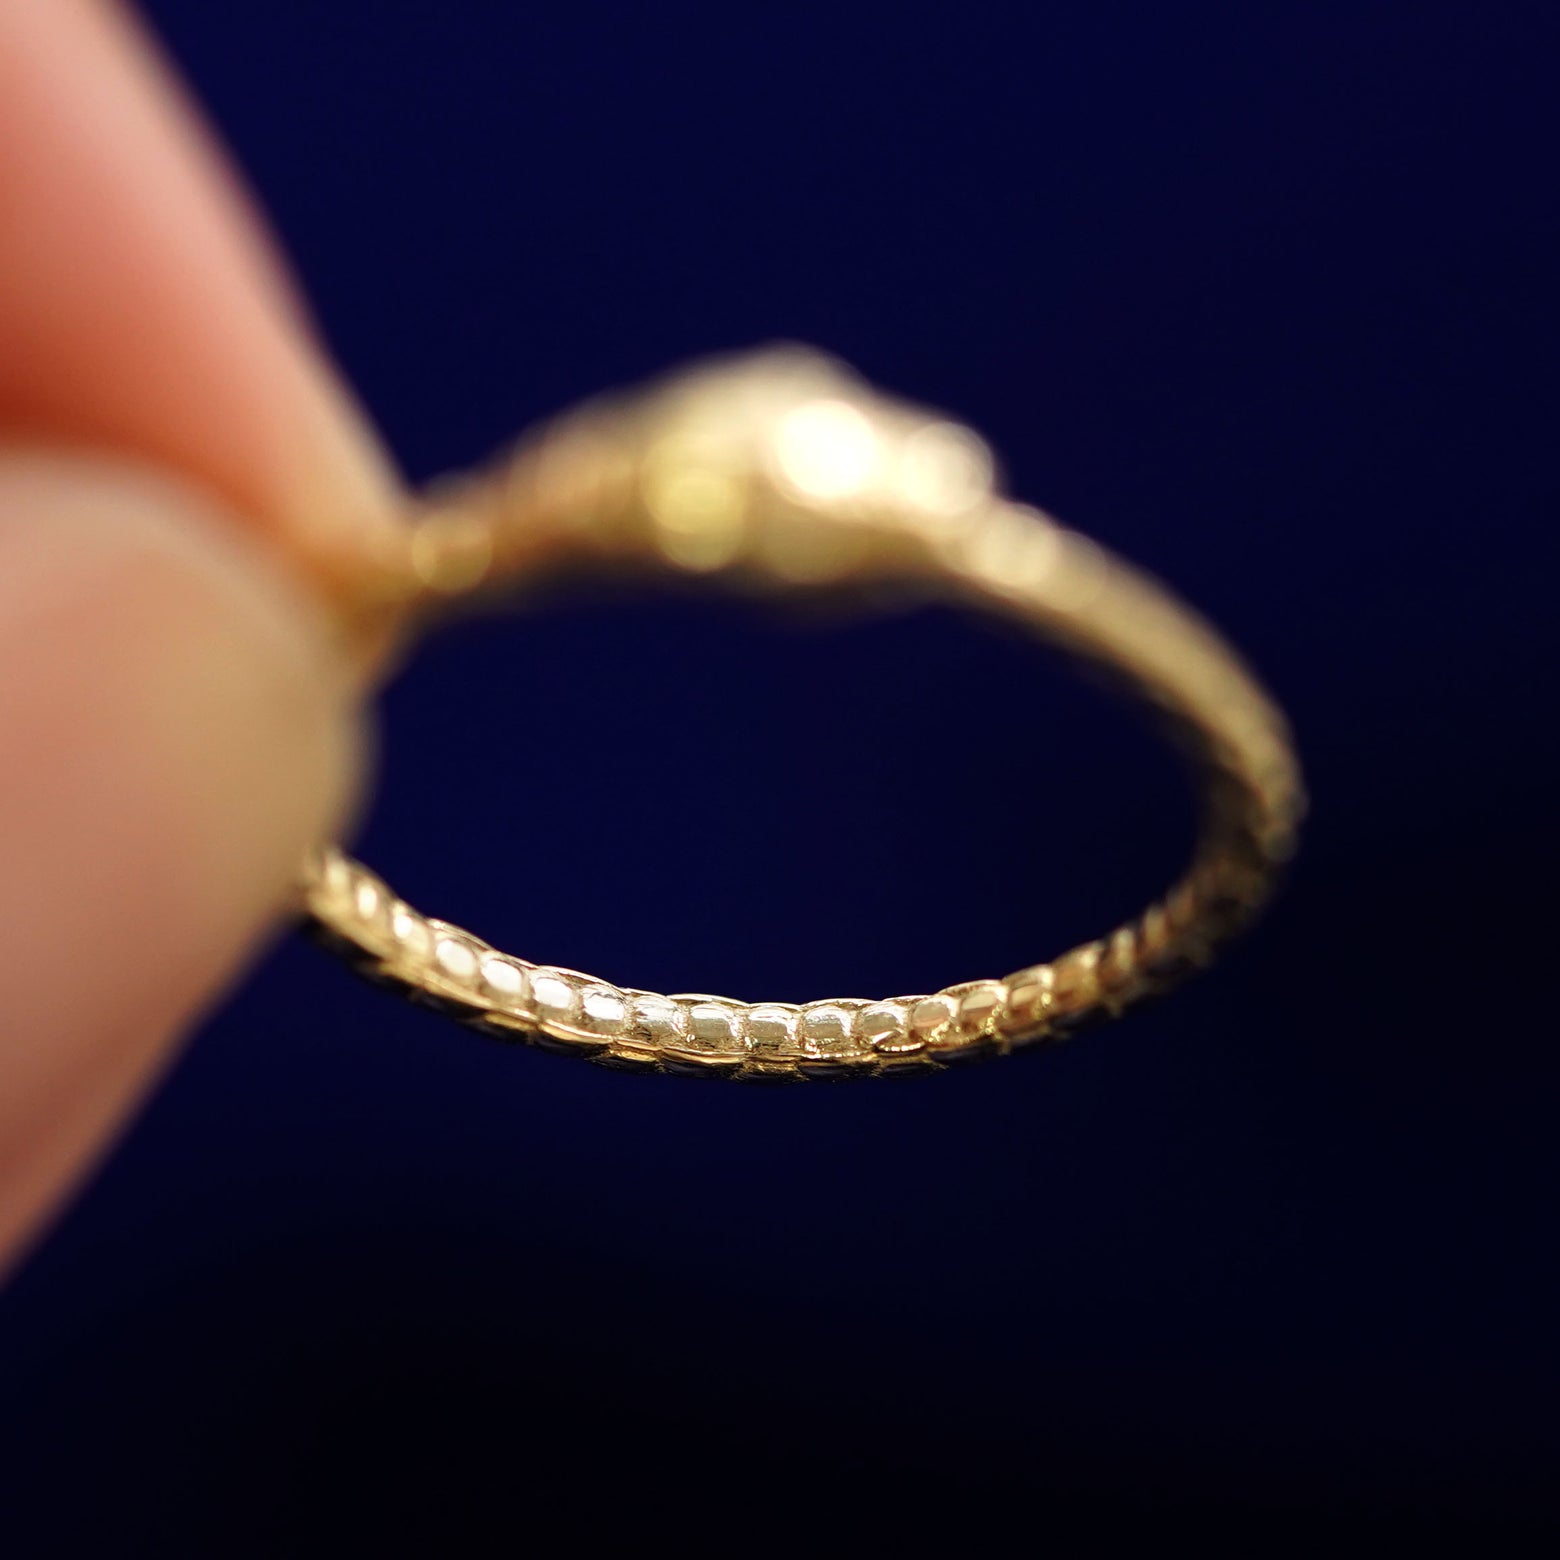 Underside view of a solid 14k gold Ouroboros Snake Ring to show scale detailing on the band